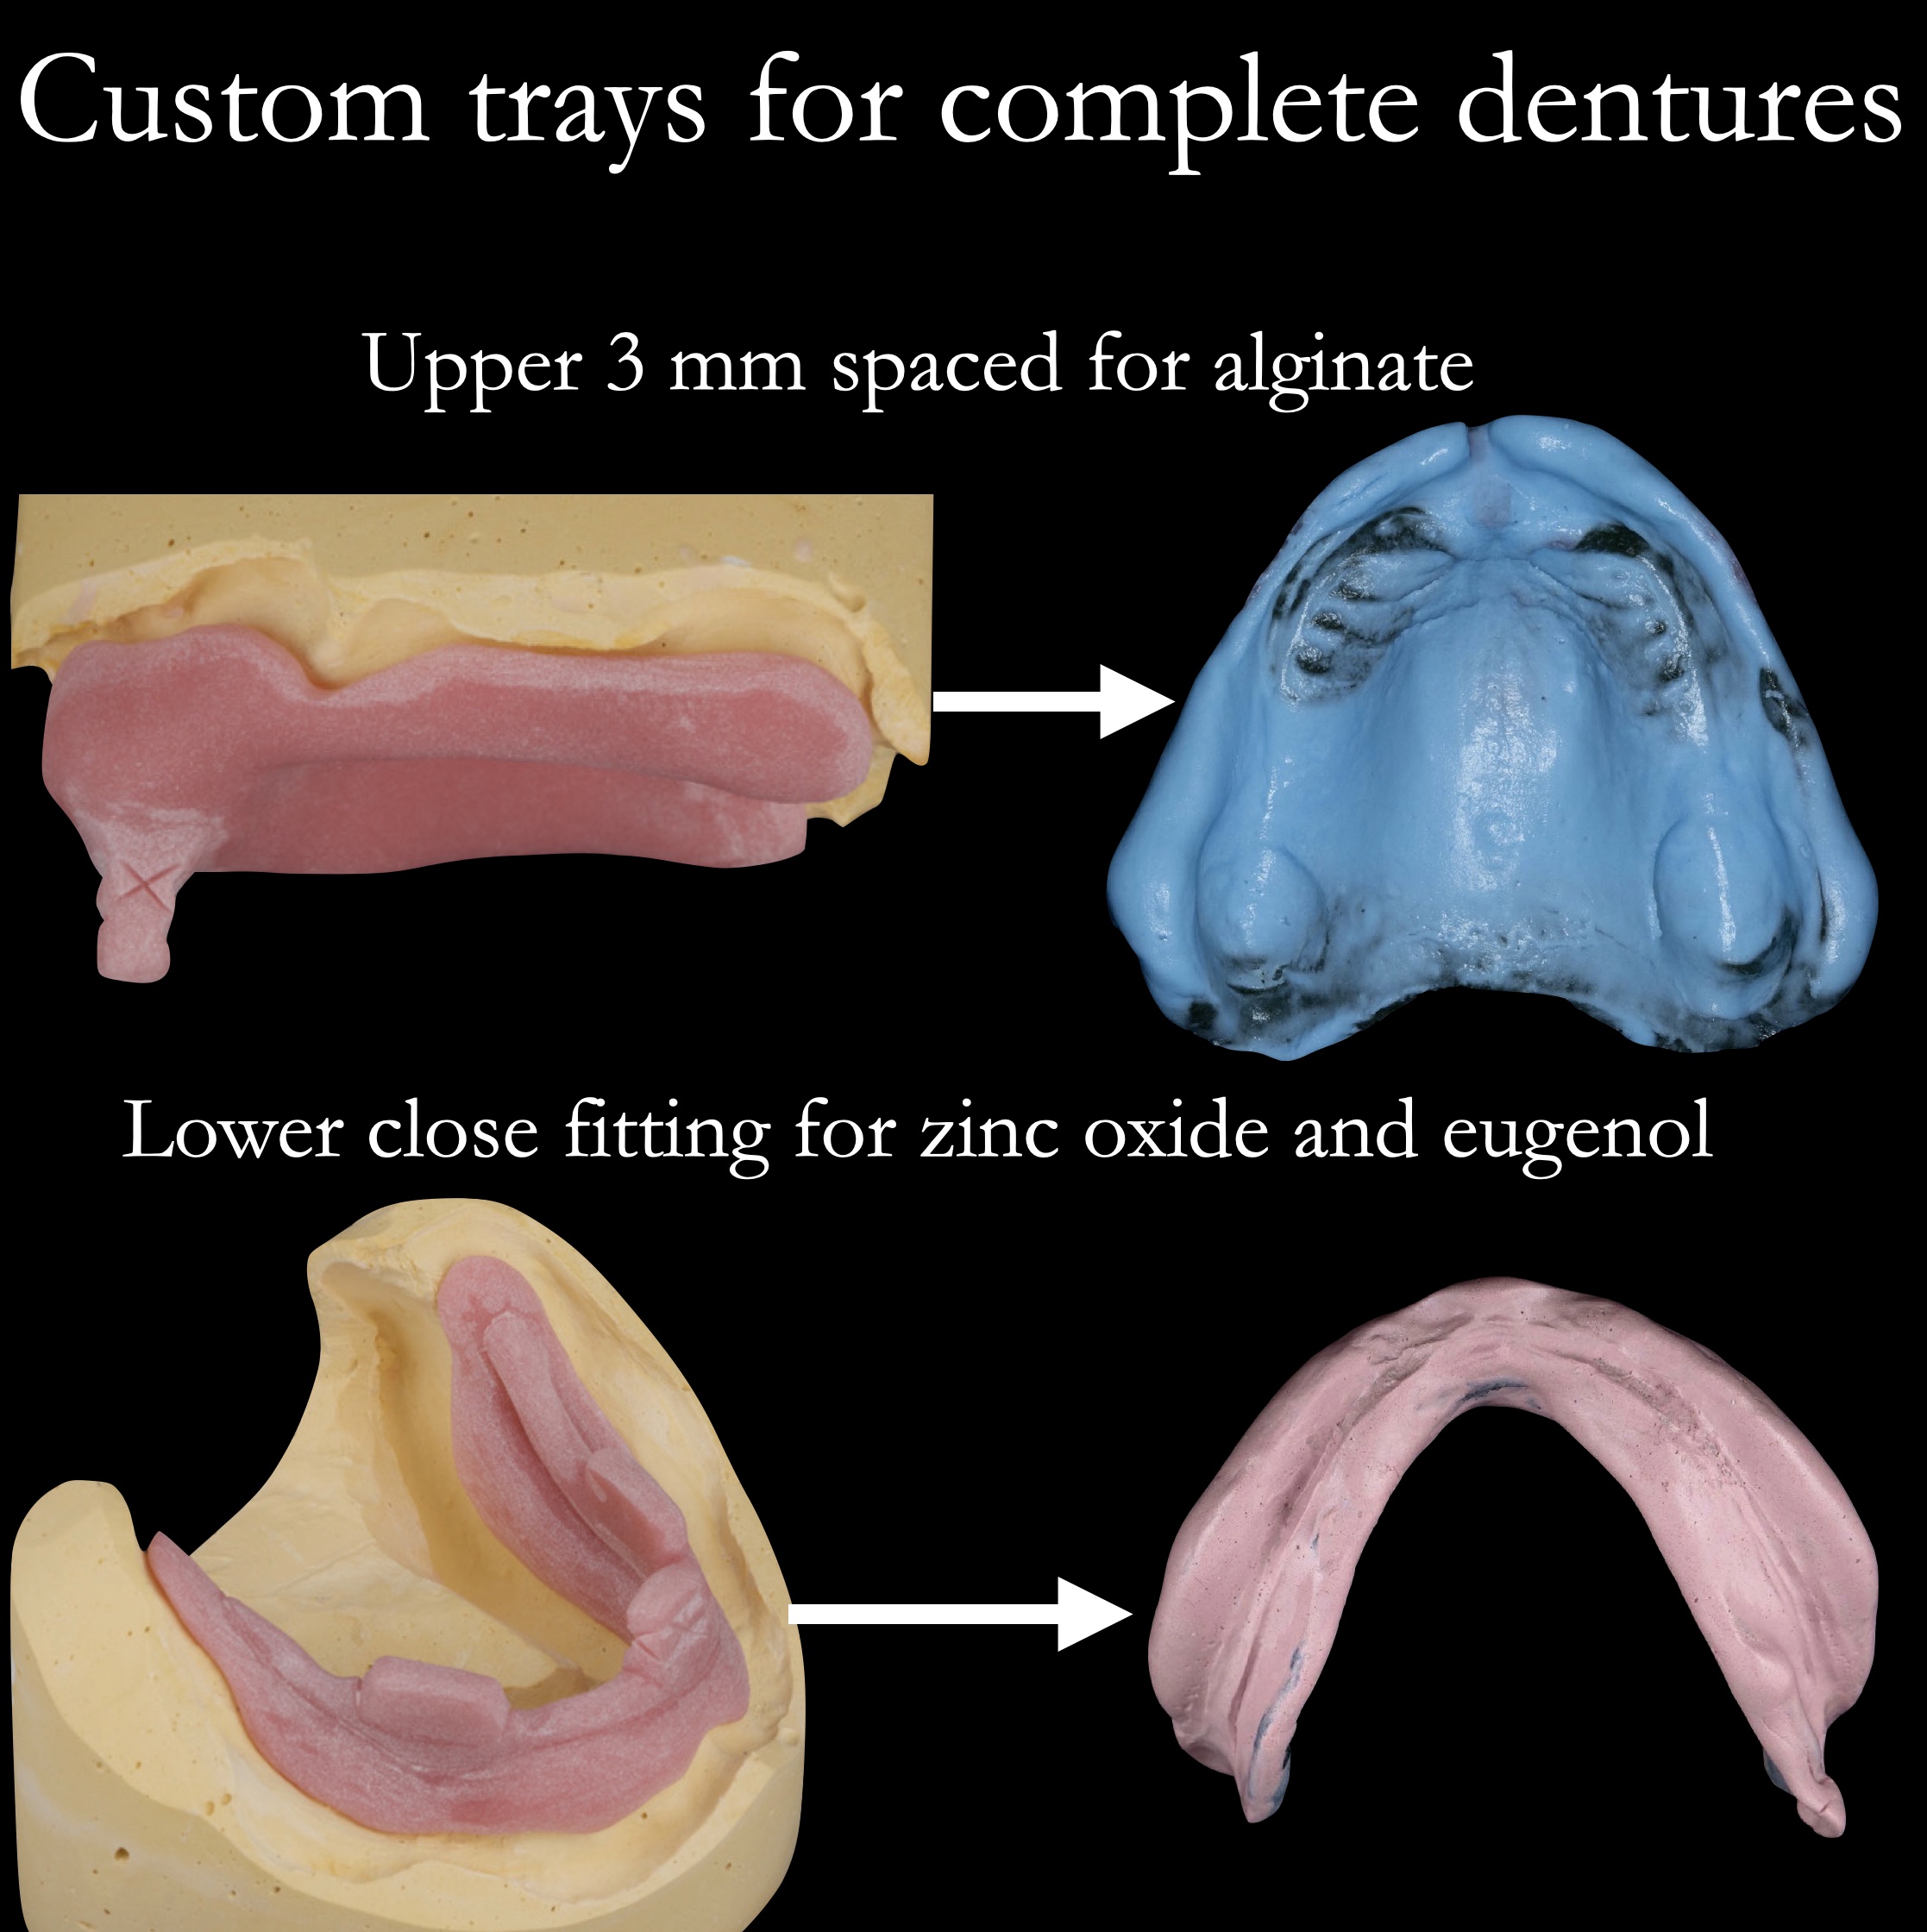 Spacing of custom trays for complete dentures